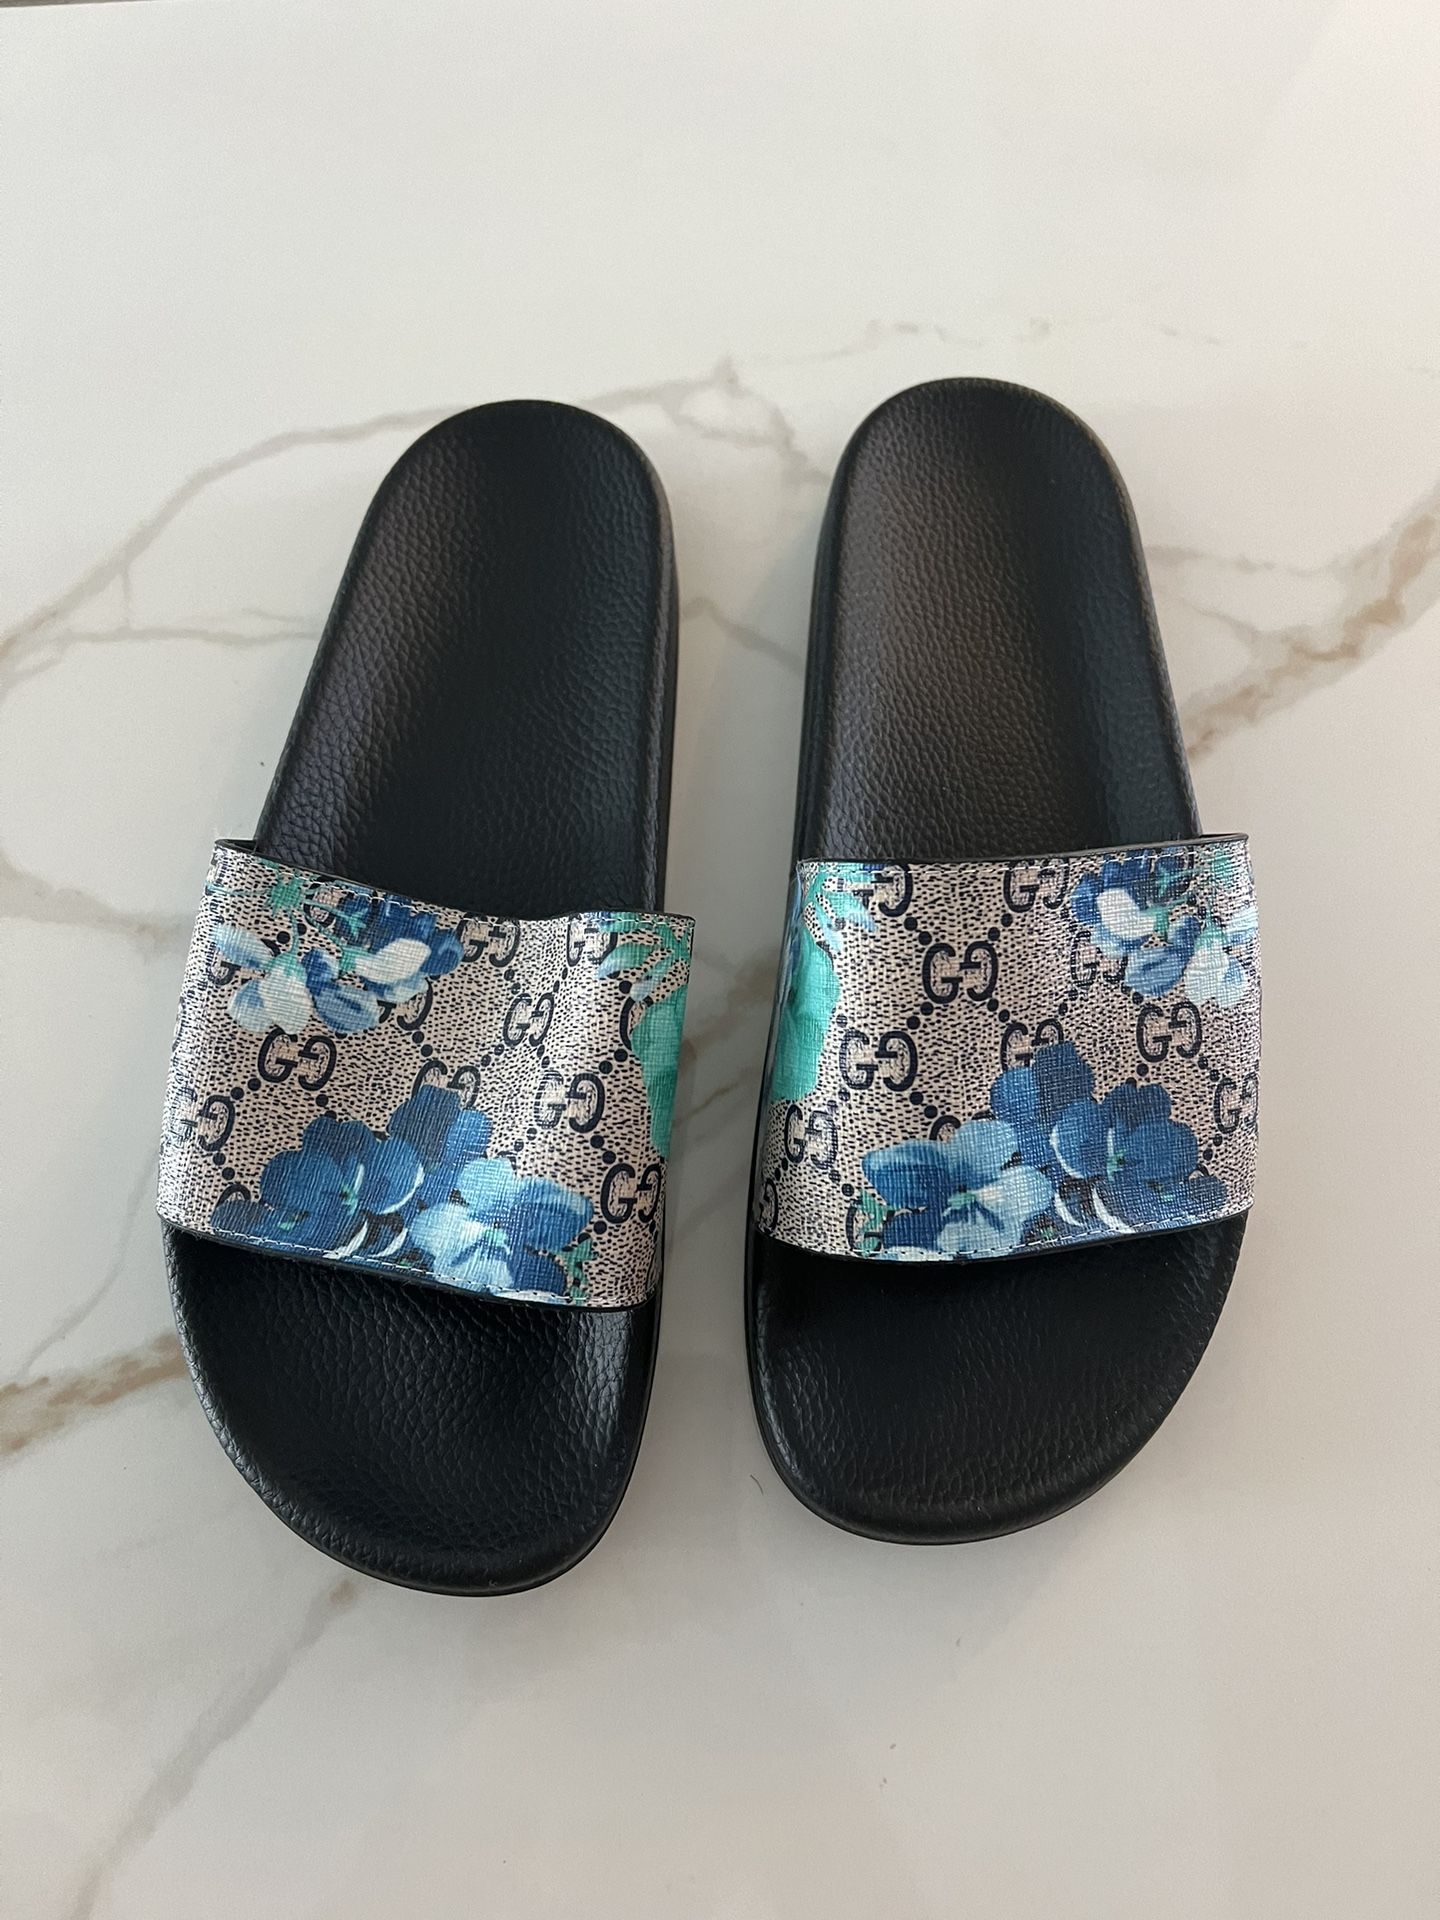 Gucci Bloom Men’s Slippers Size 9/43